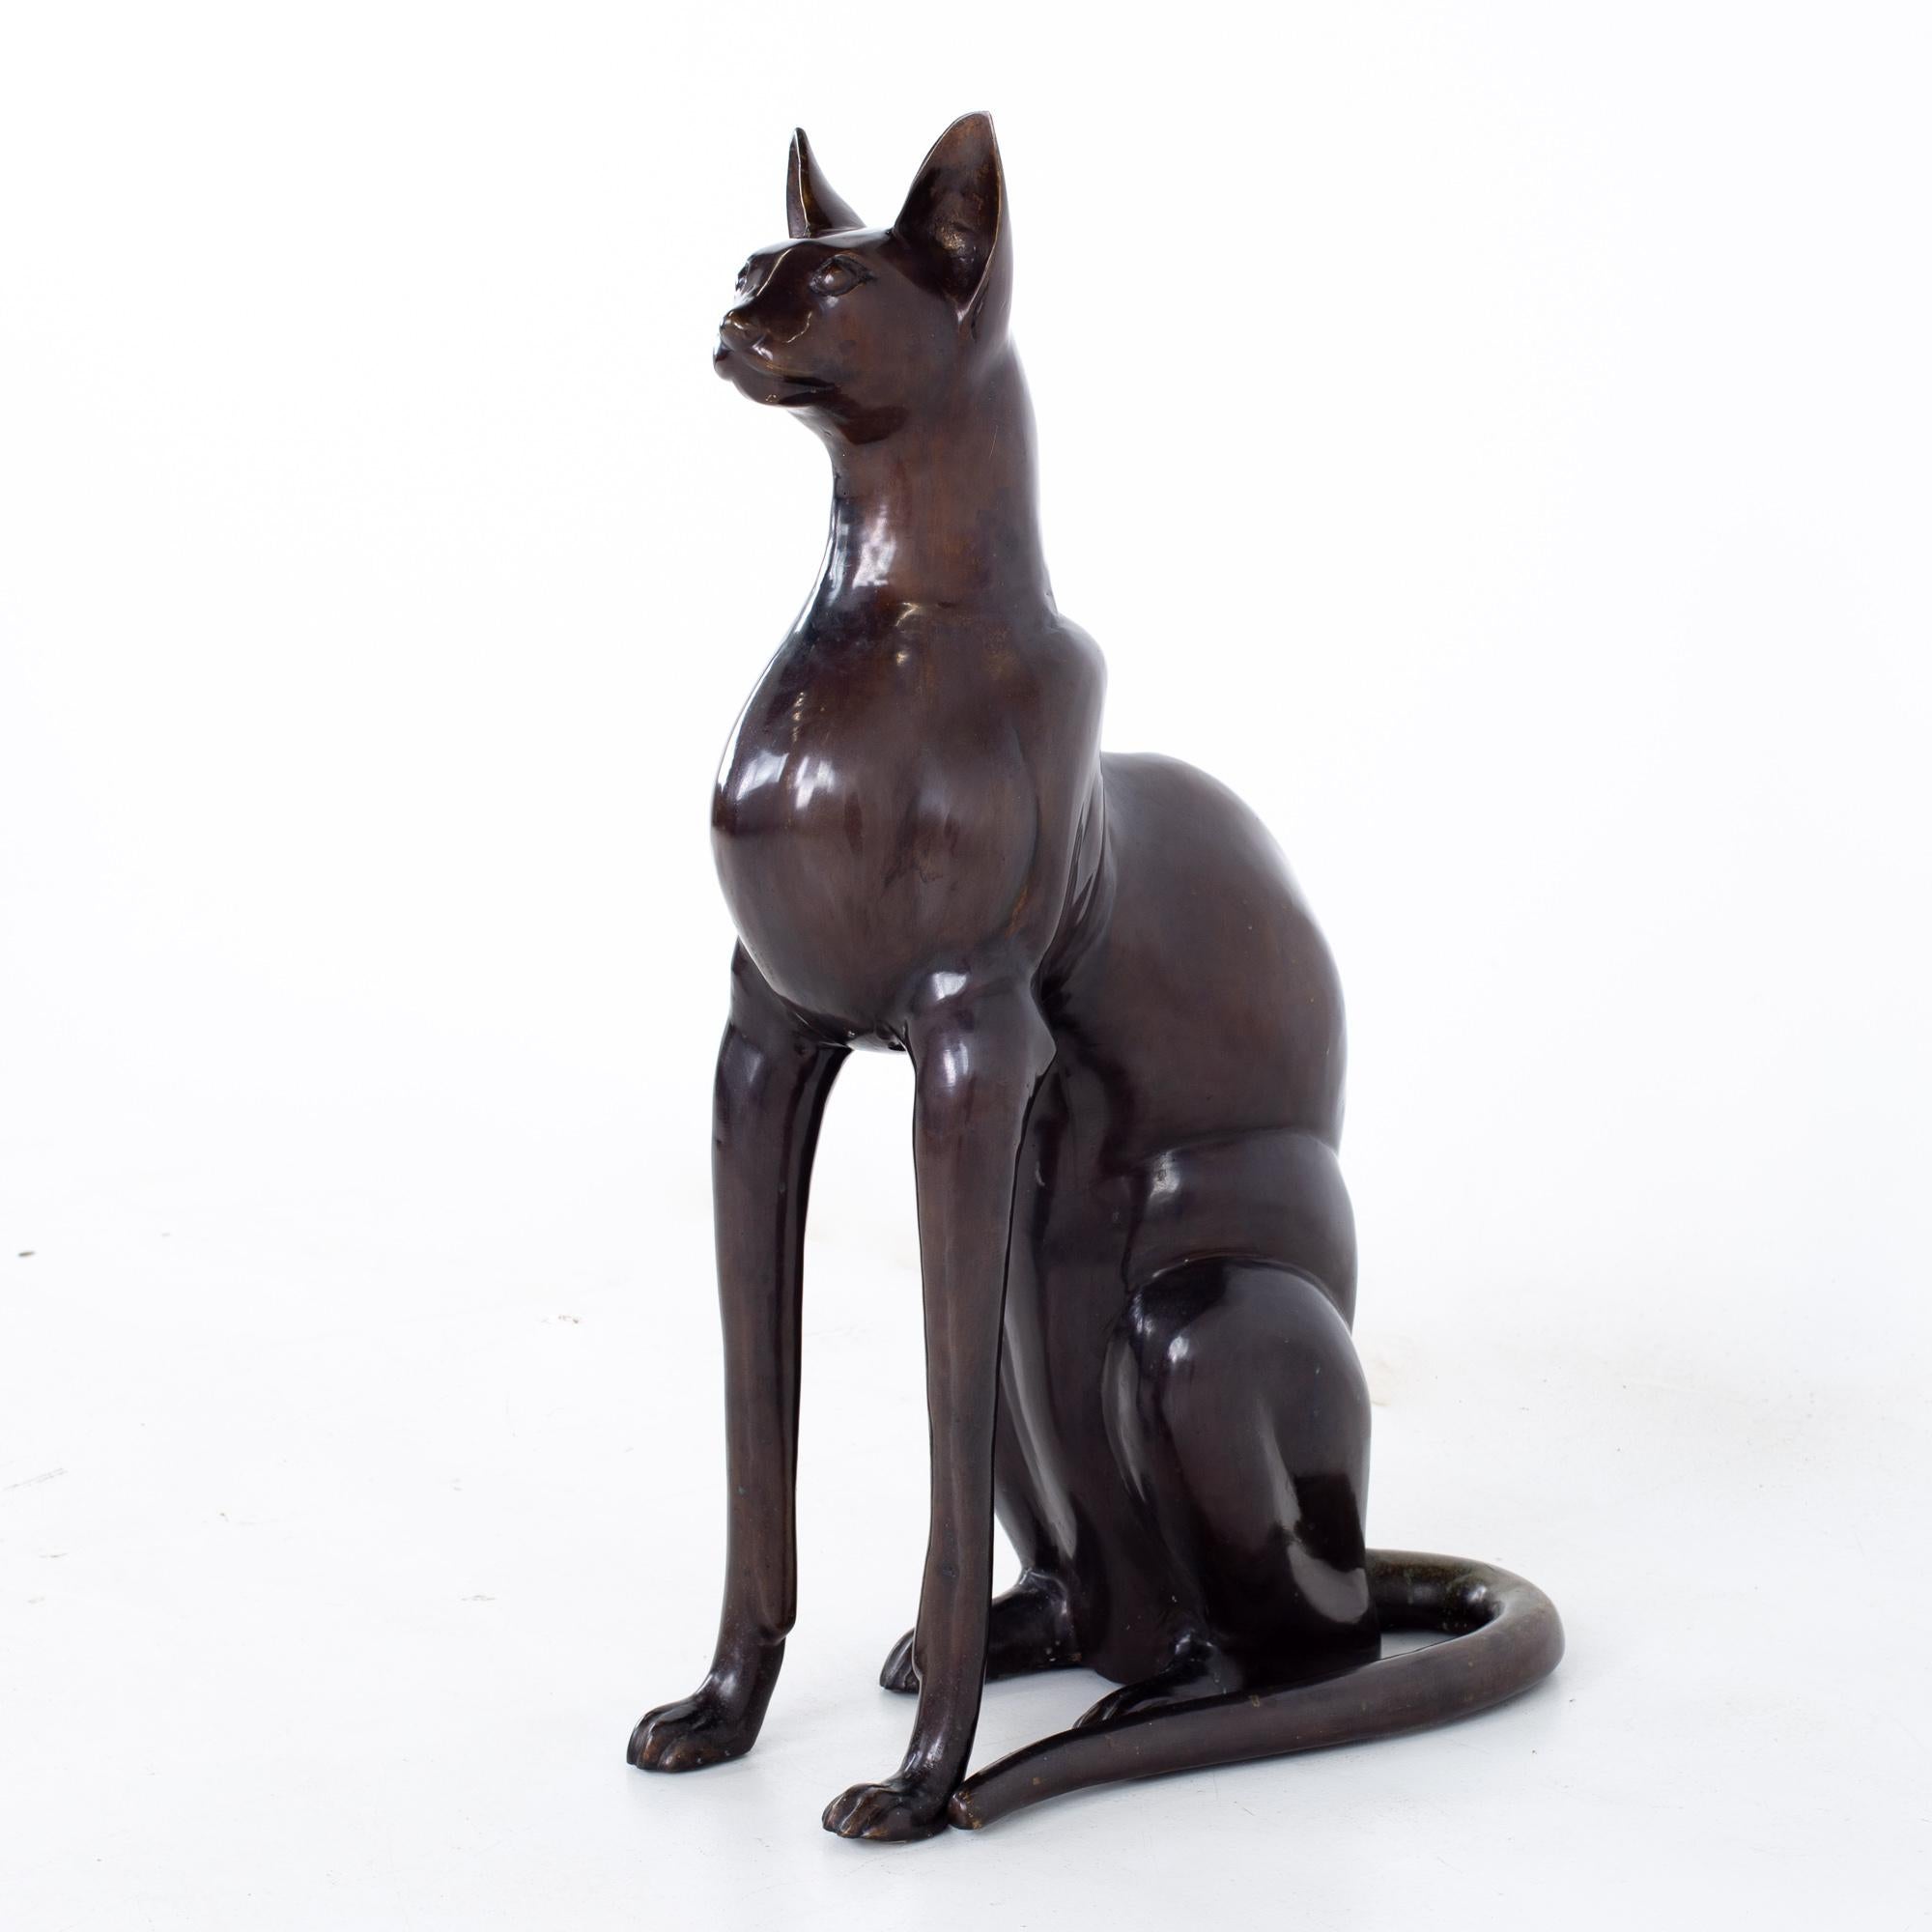 Mid century bronze cat sculpture
Sculpture measures: 8 wide x 20 deep x 32 inches high

All pieces of furniture can be had in what we call restored vintage condition. That means the piece is restored upon purchase so it’s free of watermarks,